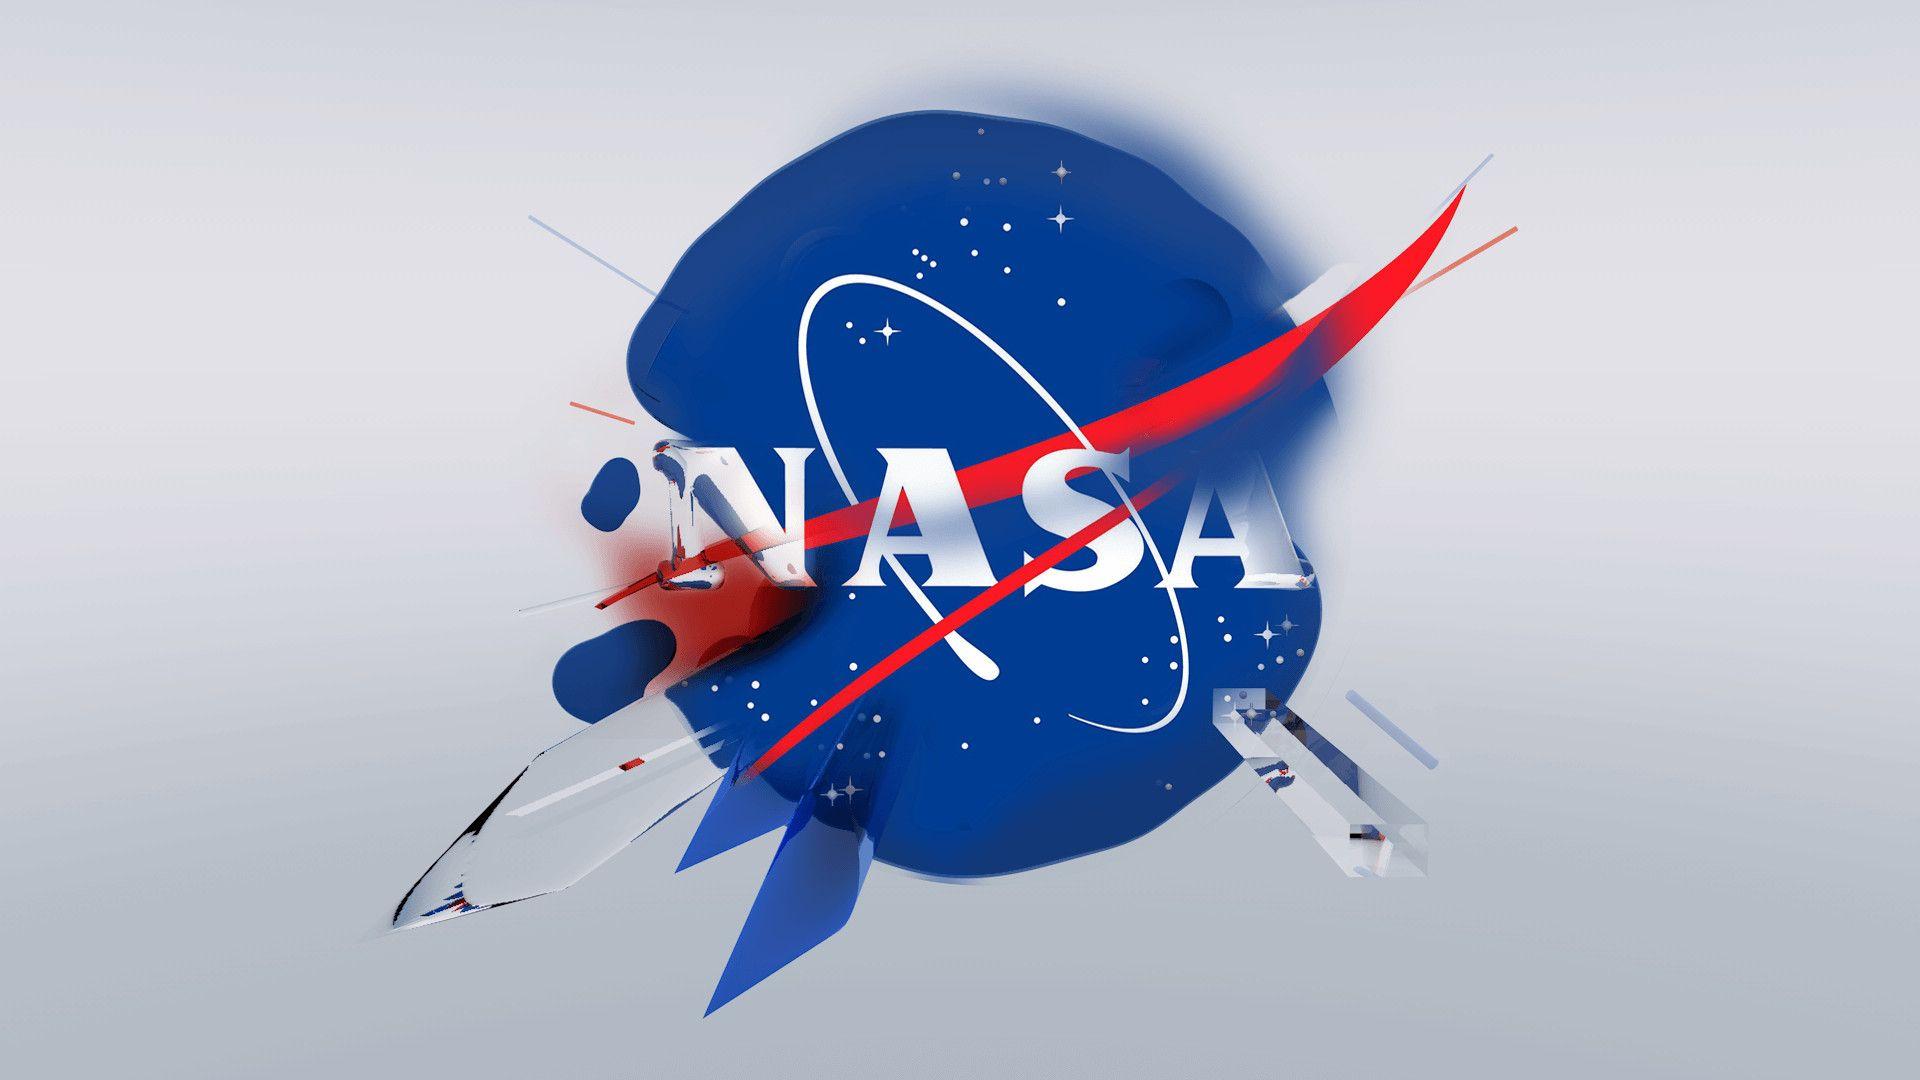 are nasa images copyright free